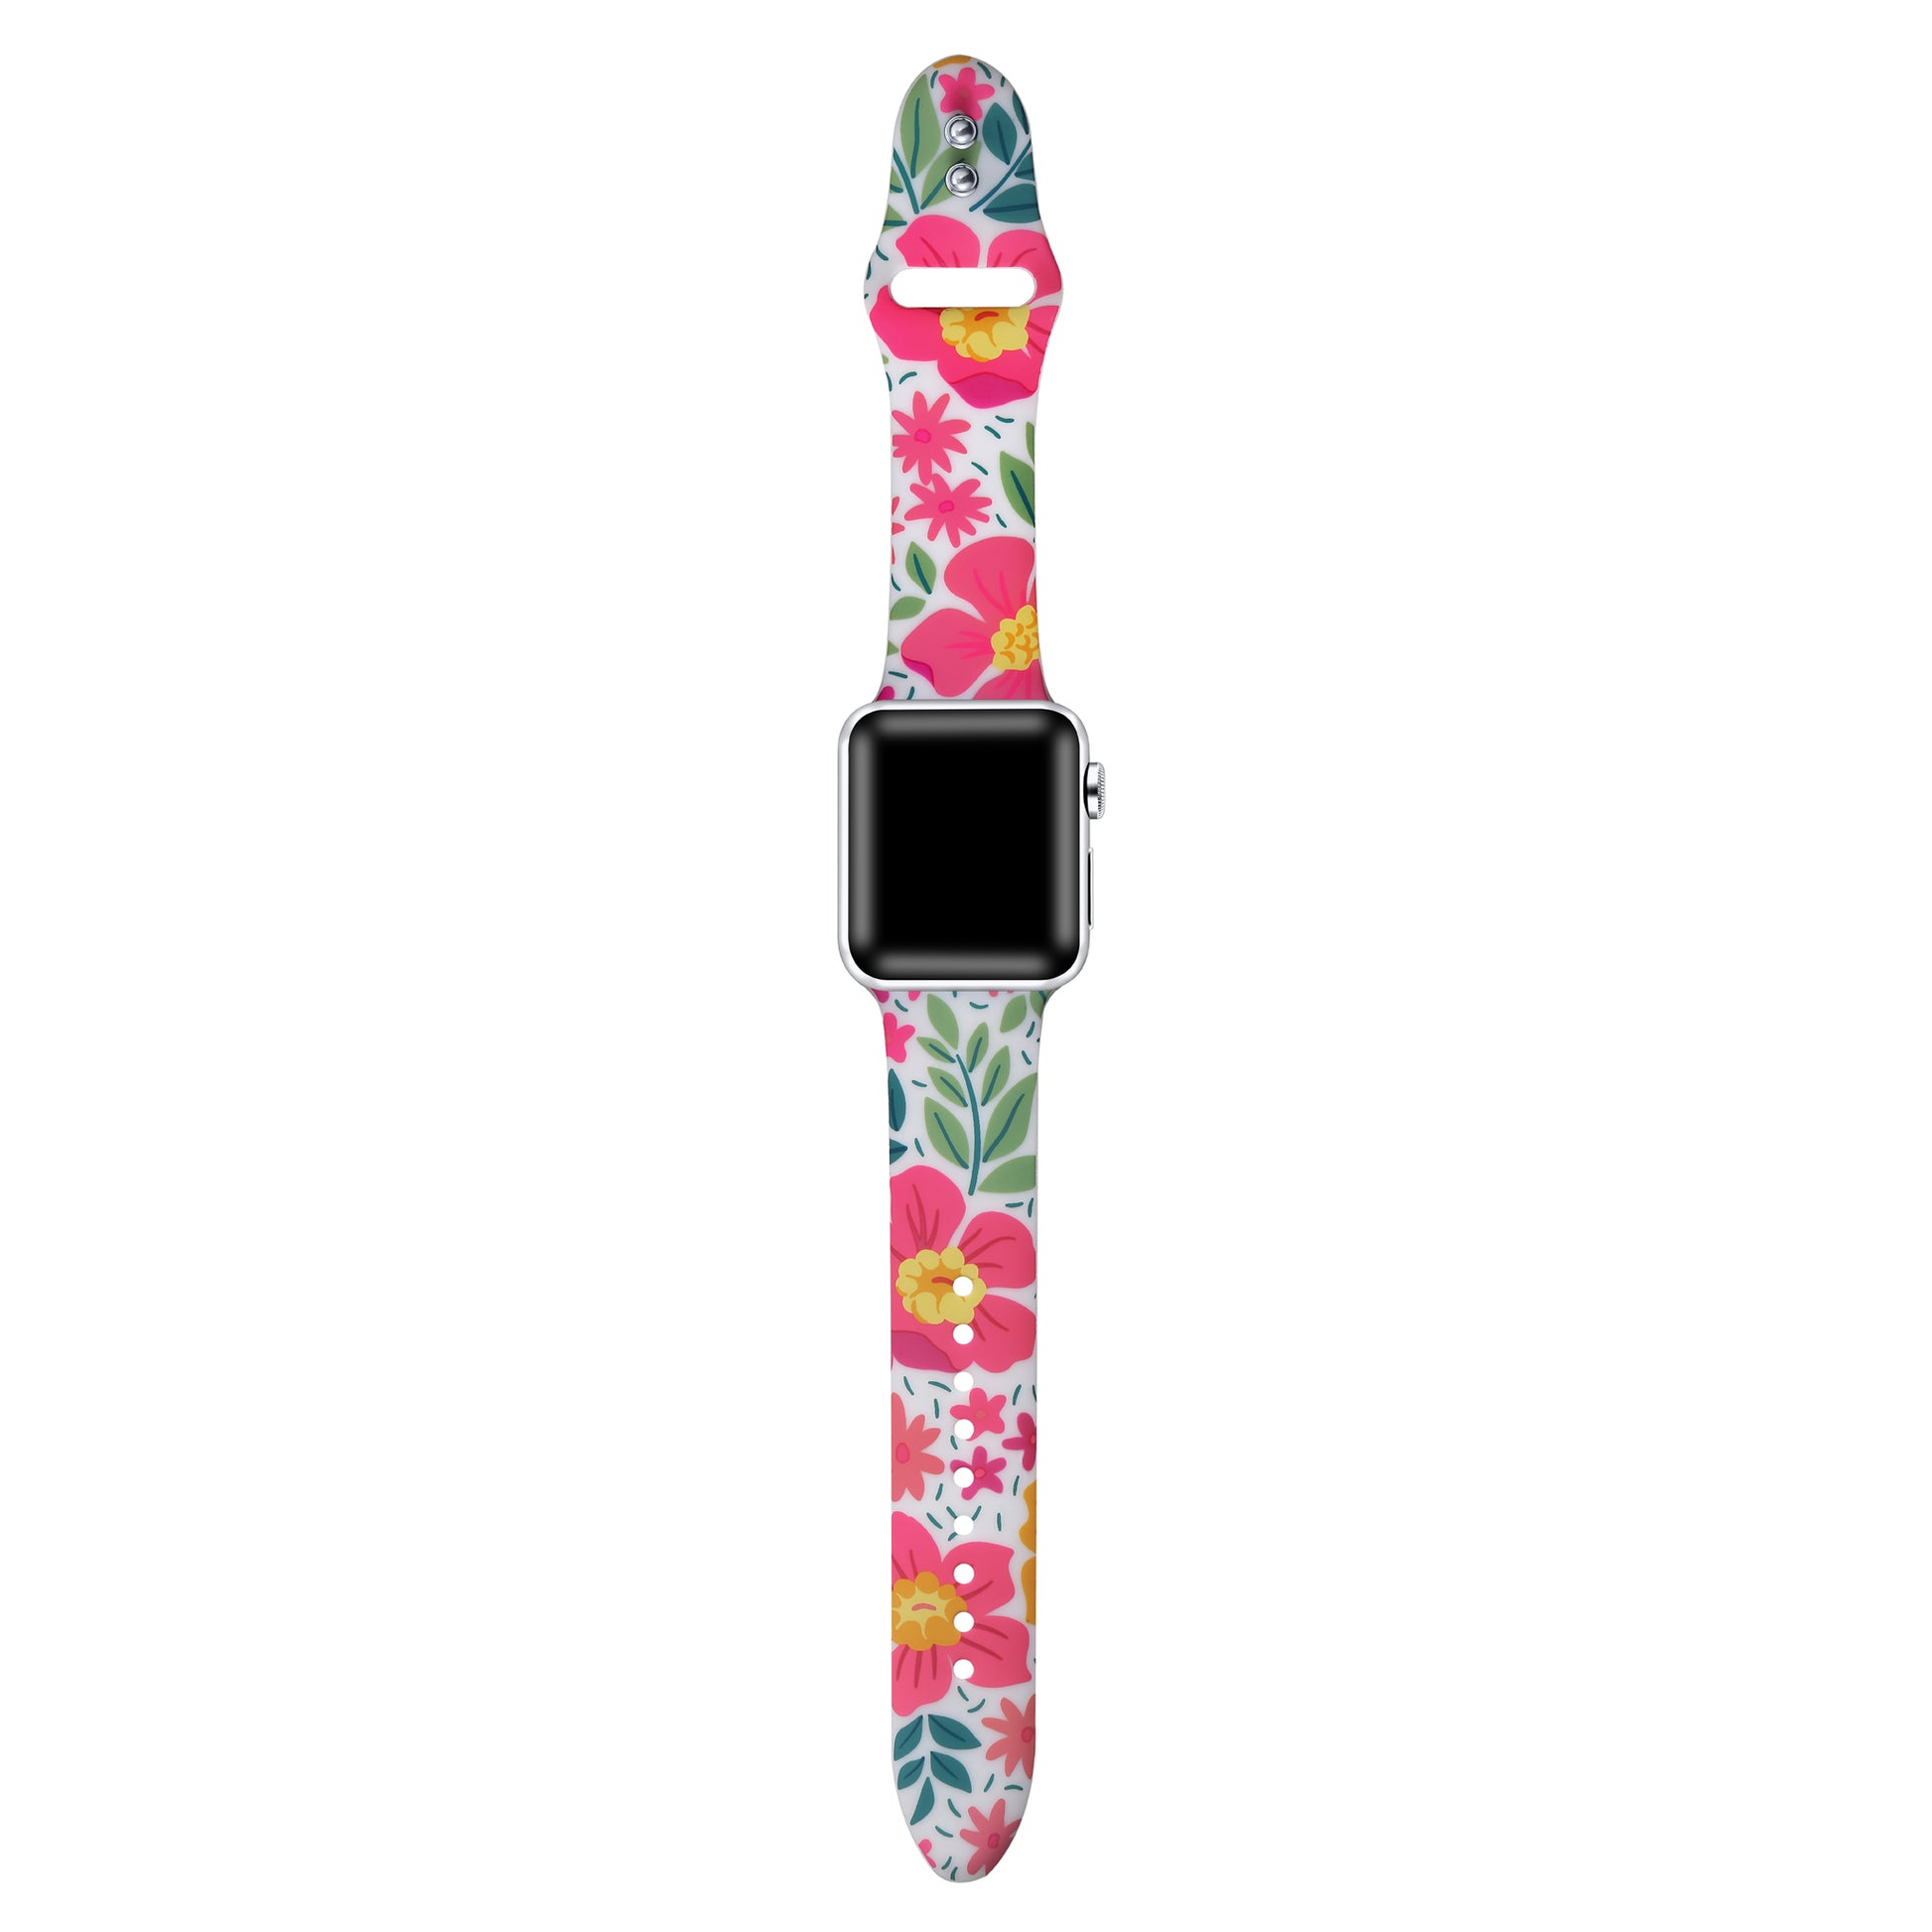 The Posh Tech Printed Silicone Band with Pins for Apple Watch Spring Floral / 38mm/40mm/41mm